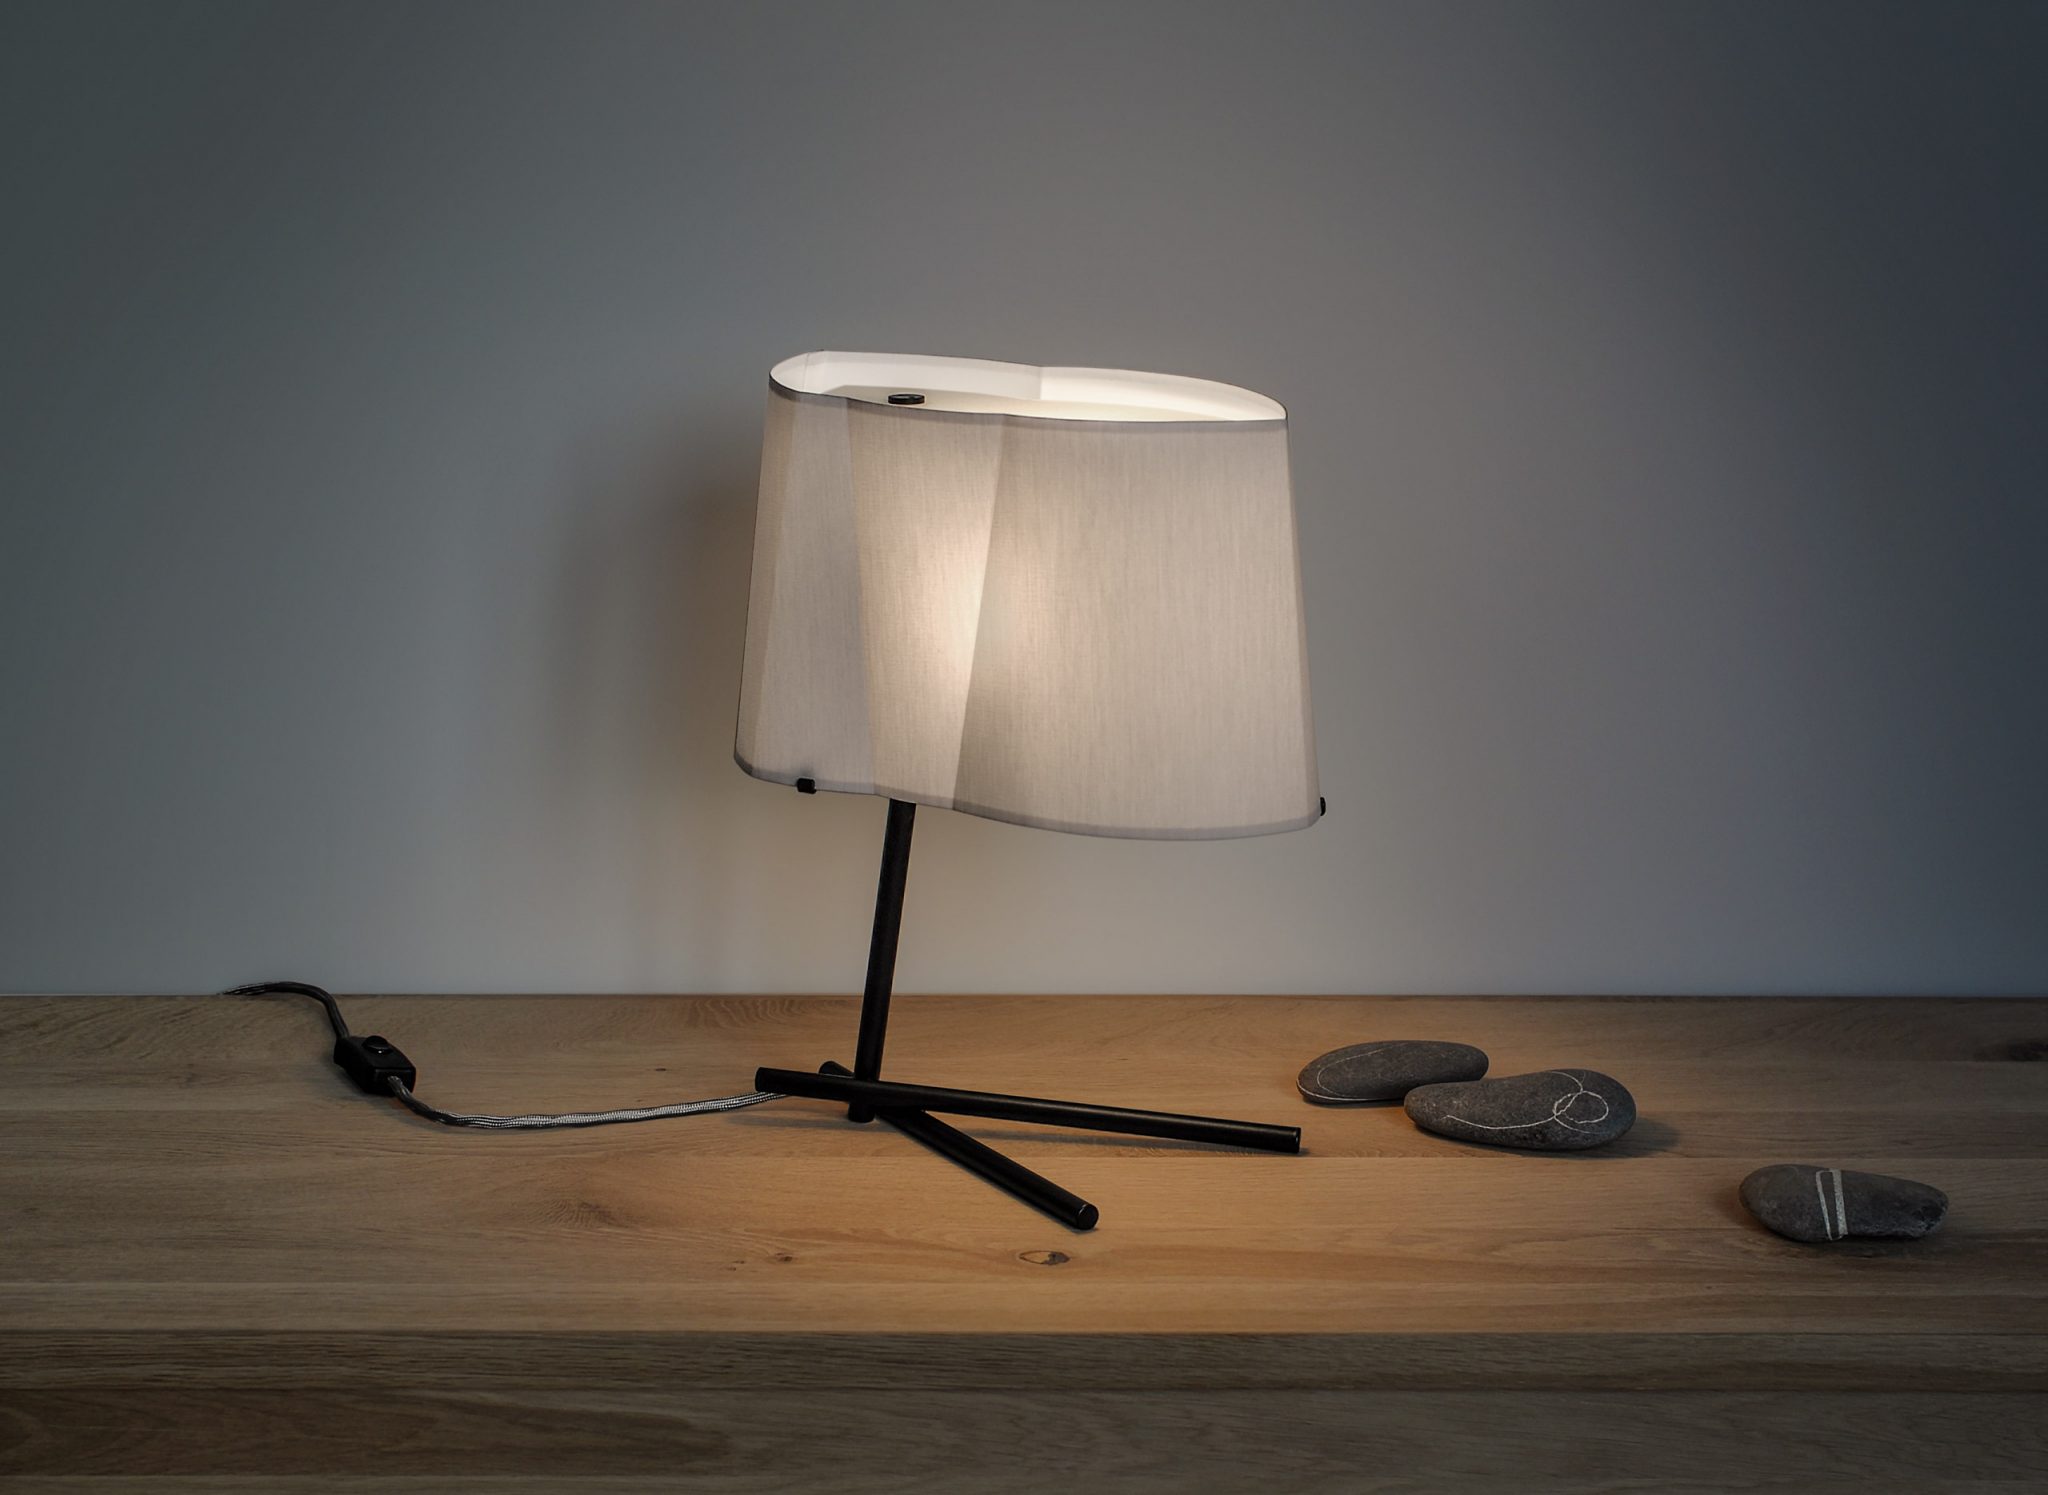 Bent Bird table lamp on a sideboard decorated with stones.